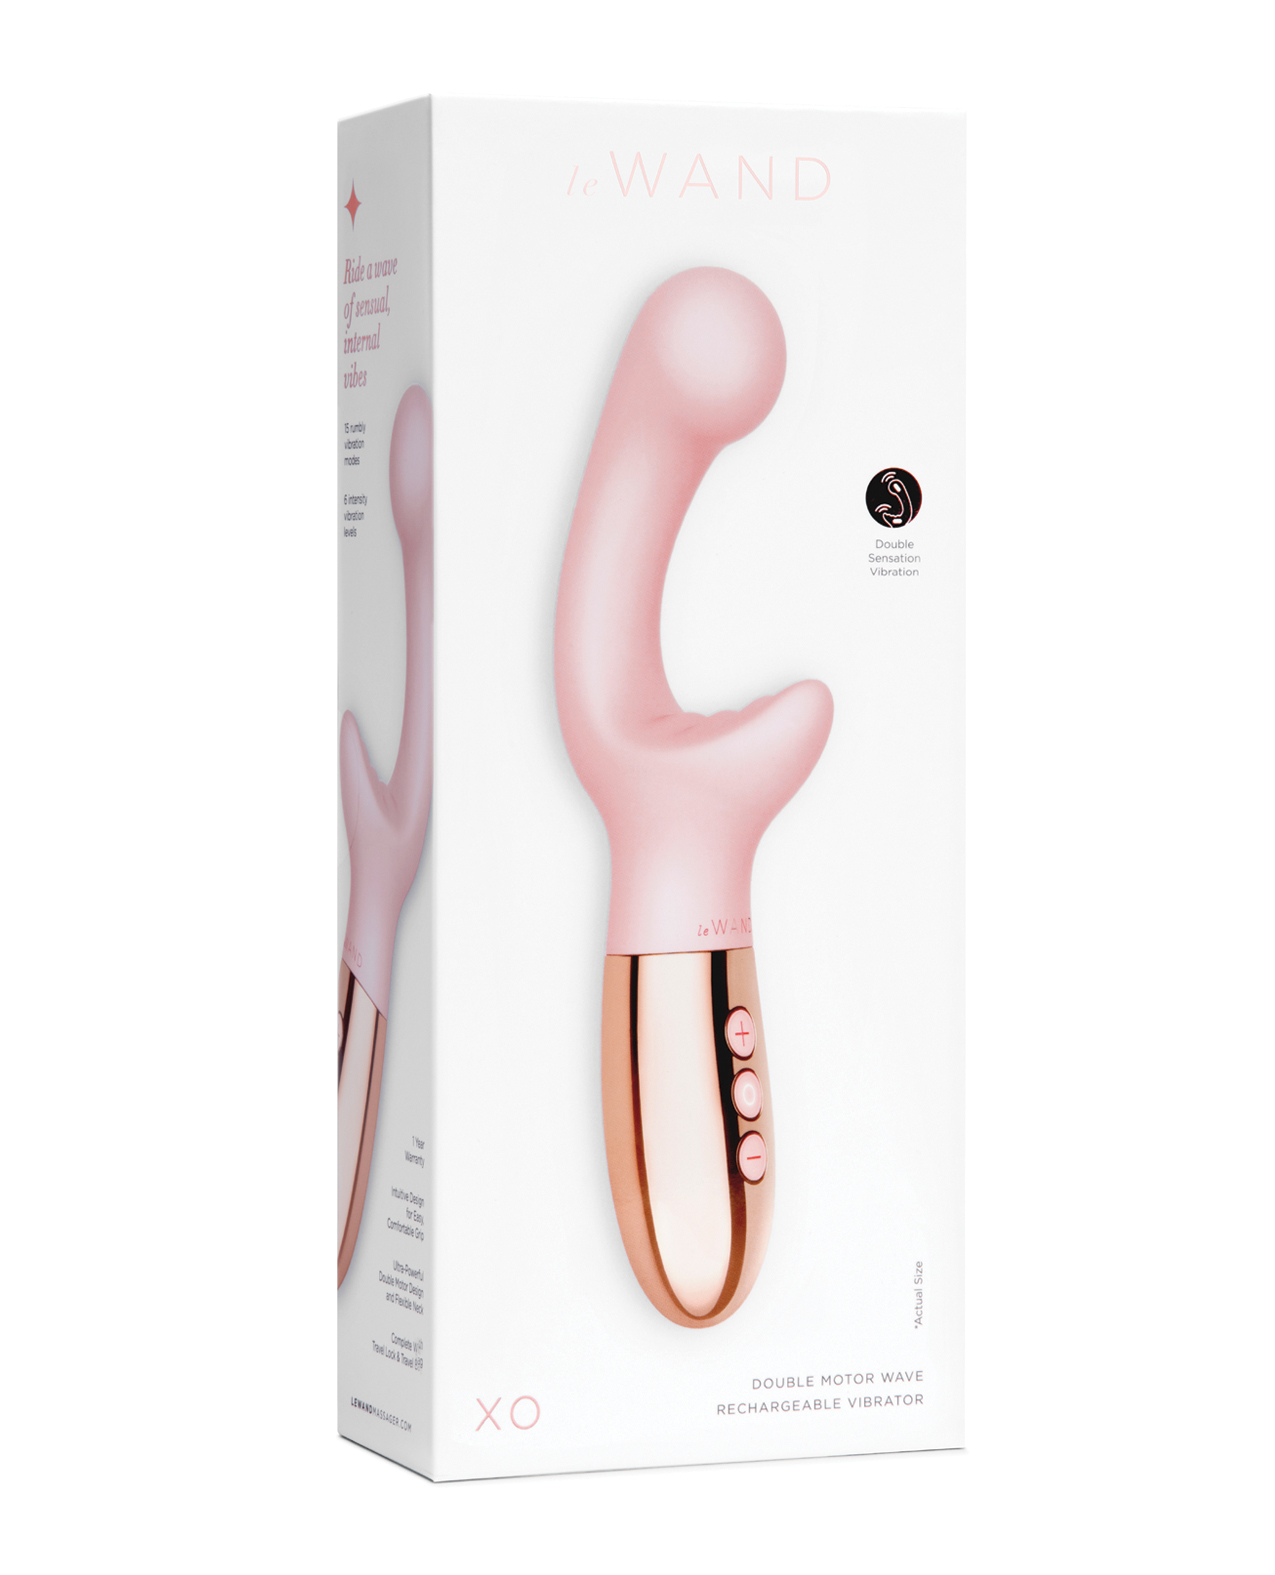 Le Wand XO Double Motor Wave Rechargeable Vibrator Rose Gold